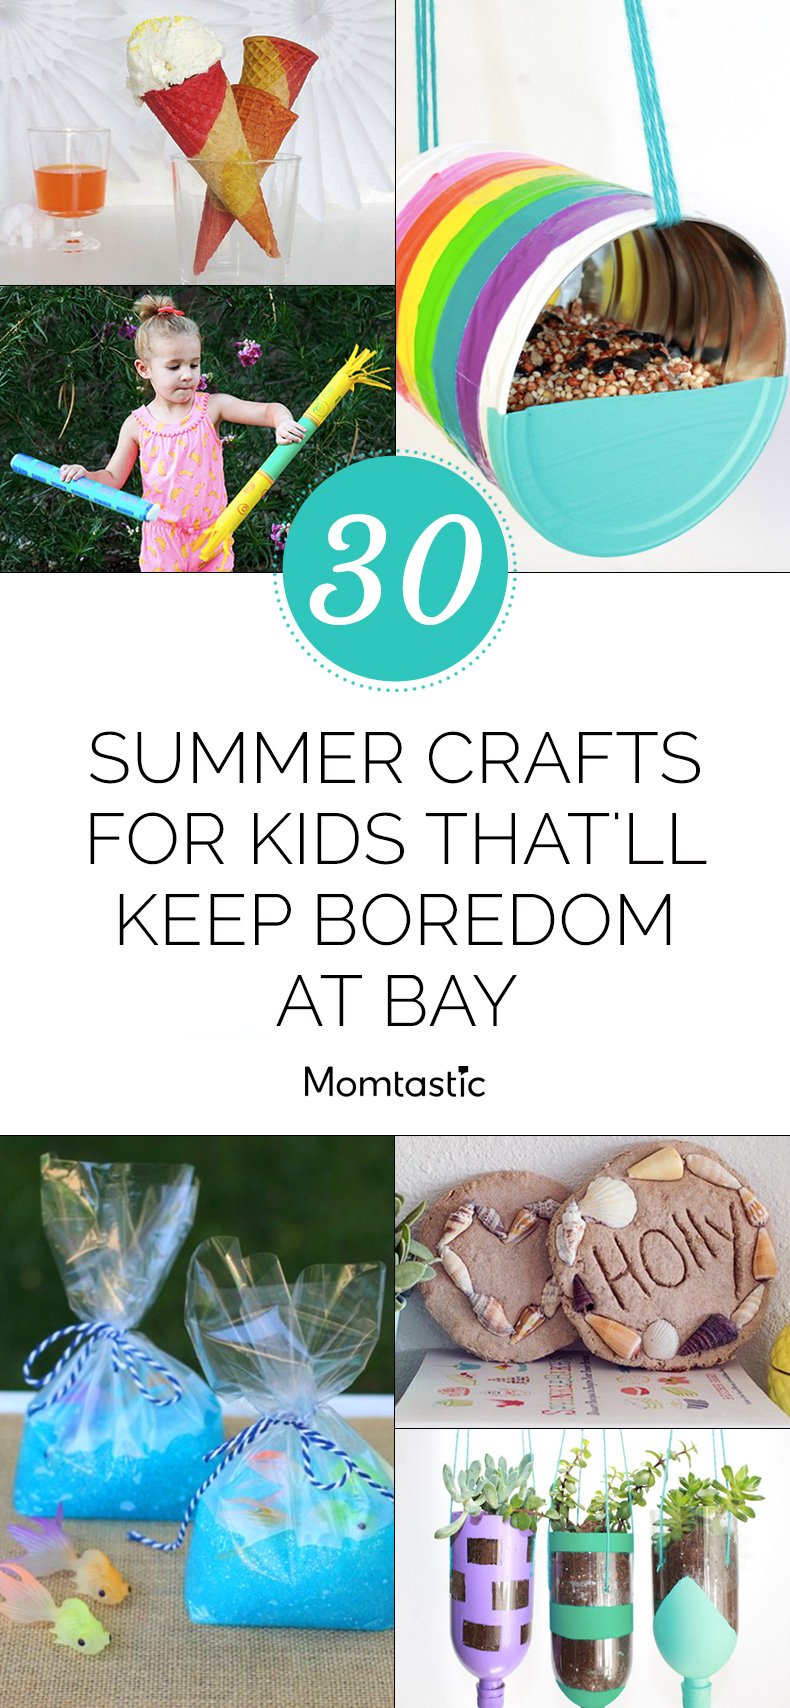 30 Summer Crafts for Kids That’ll Keep Boredom at Bay